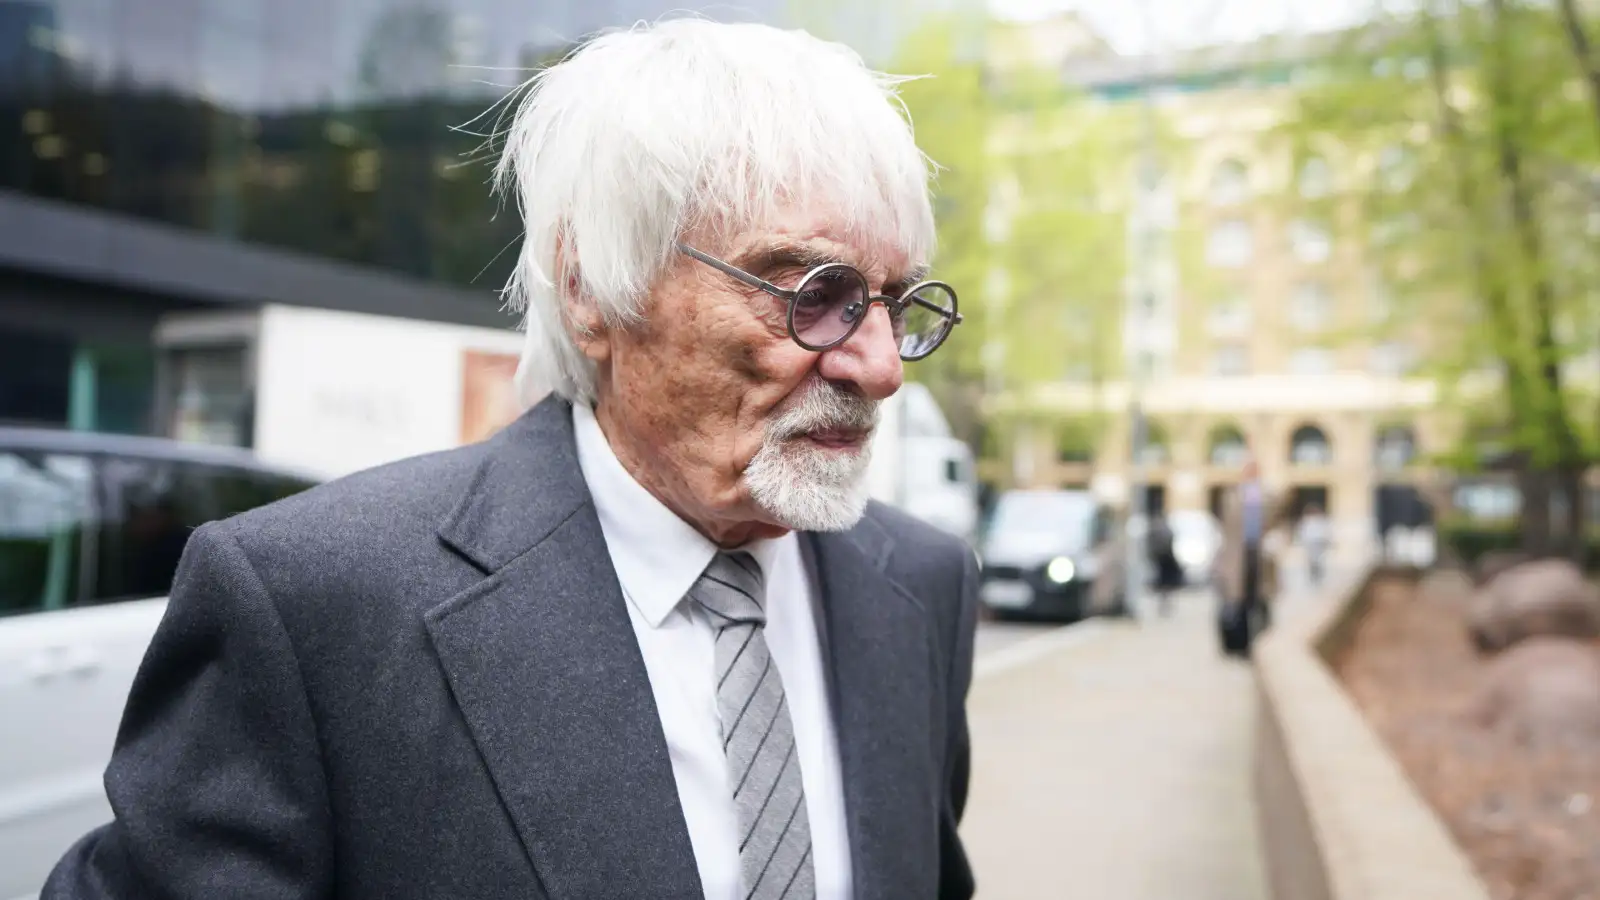 Former F1 boss Bernie Ecclestone arrives to court in the UK.